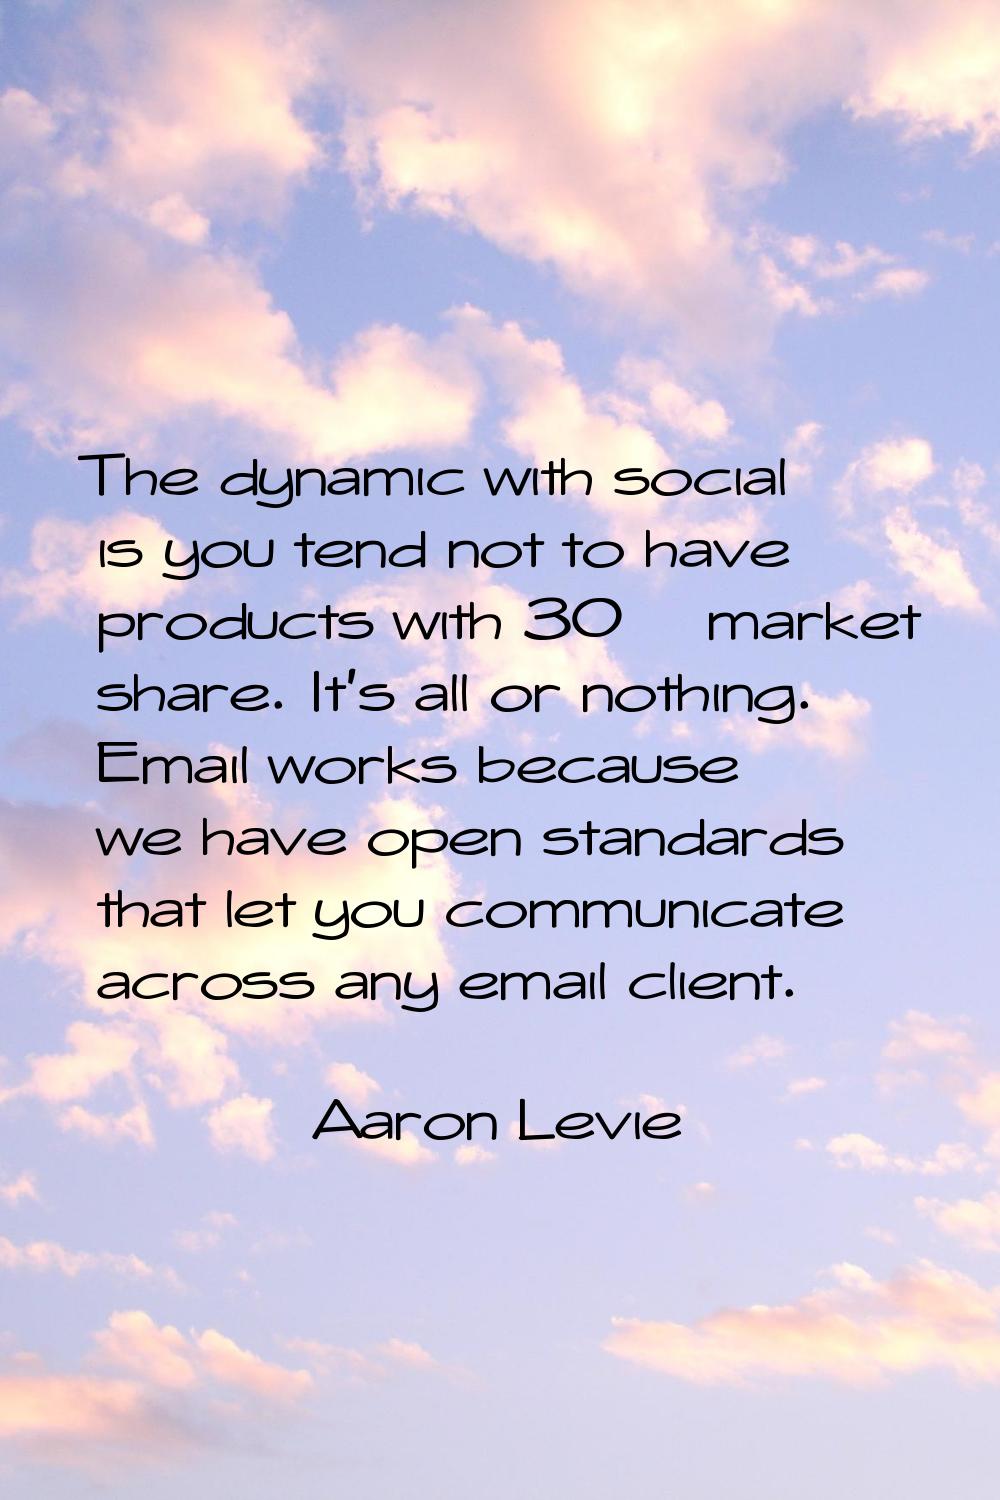 The dynamic with social is you tend not to have products with 30% market share. It's all or nothing